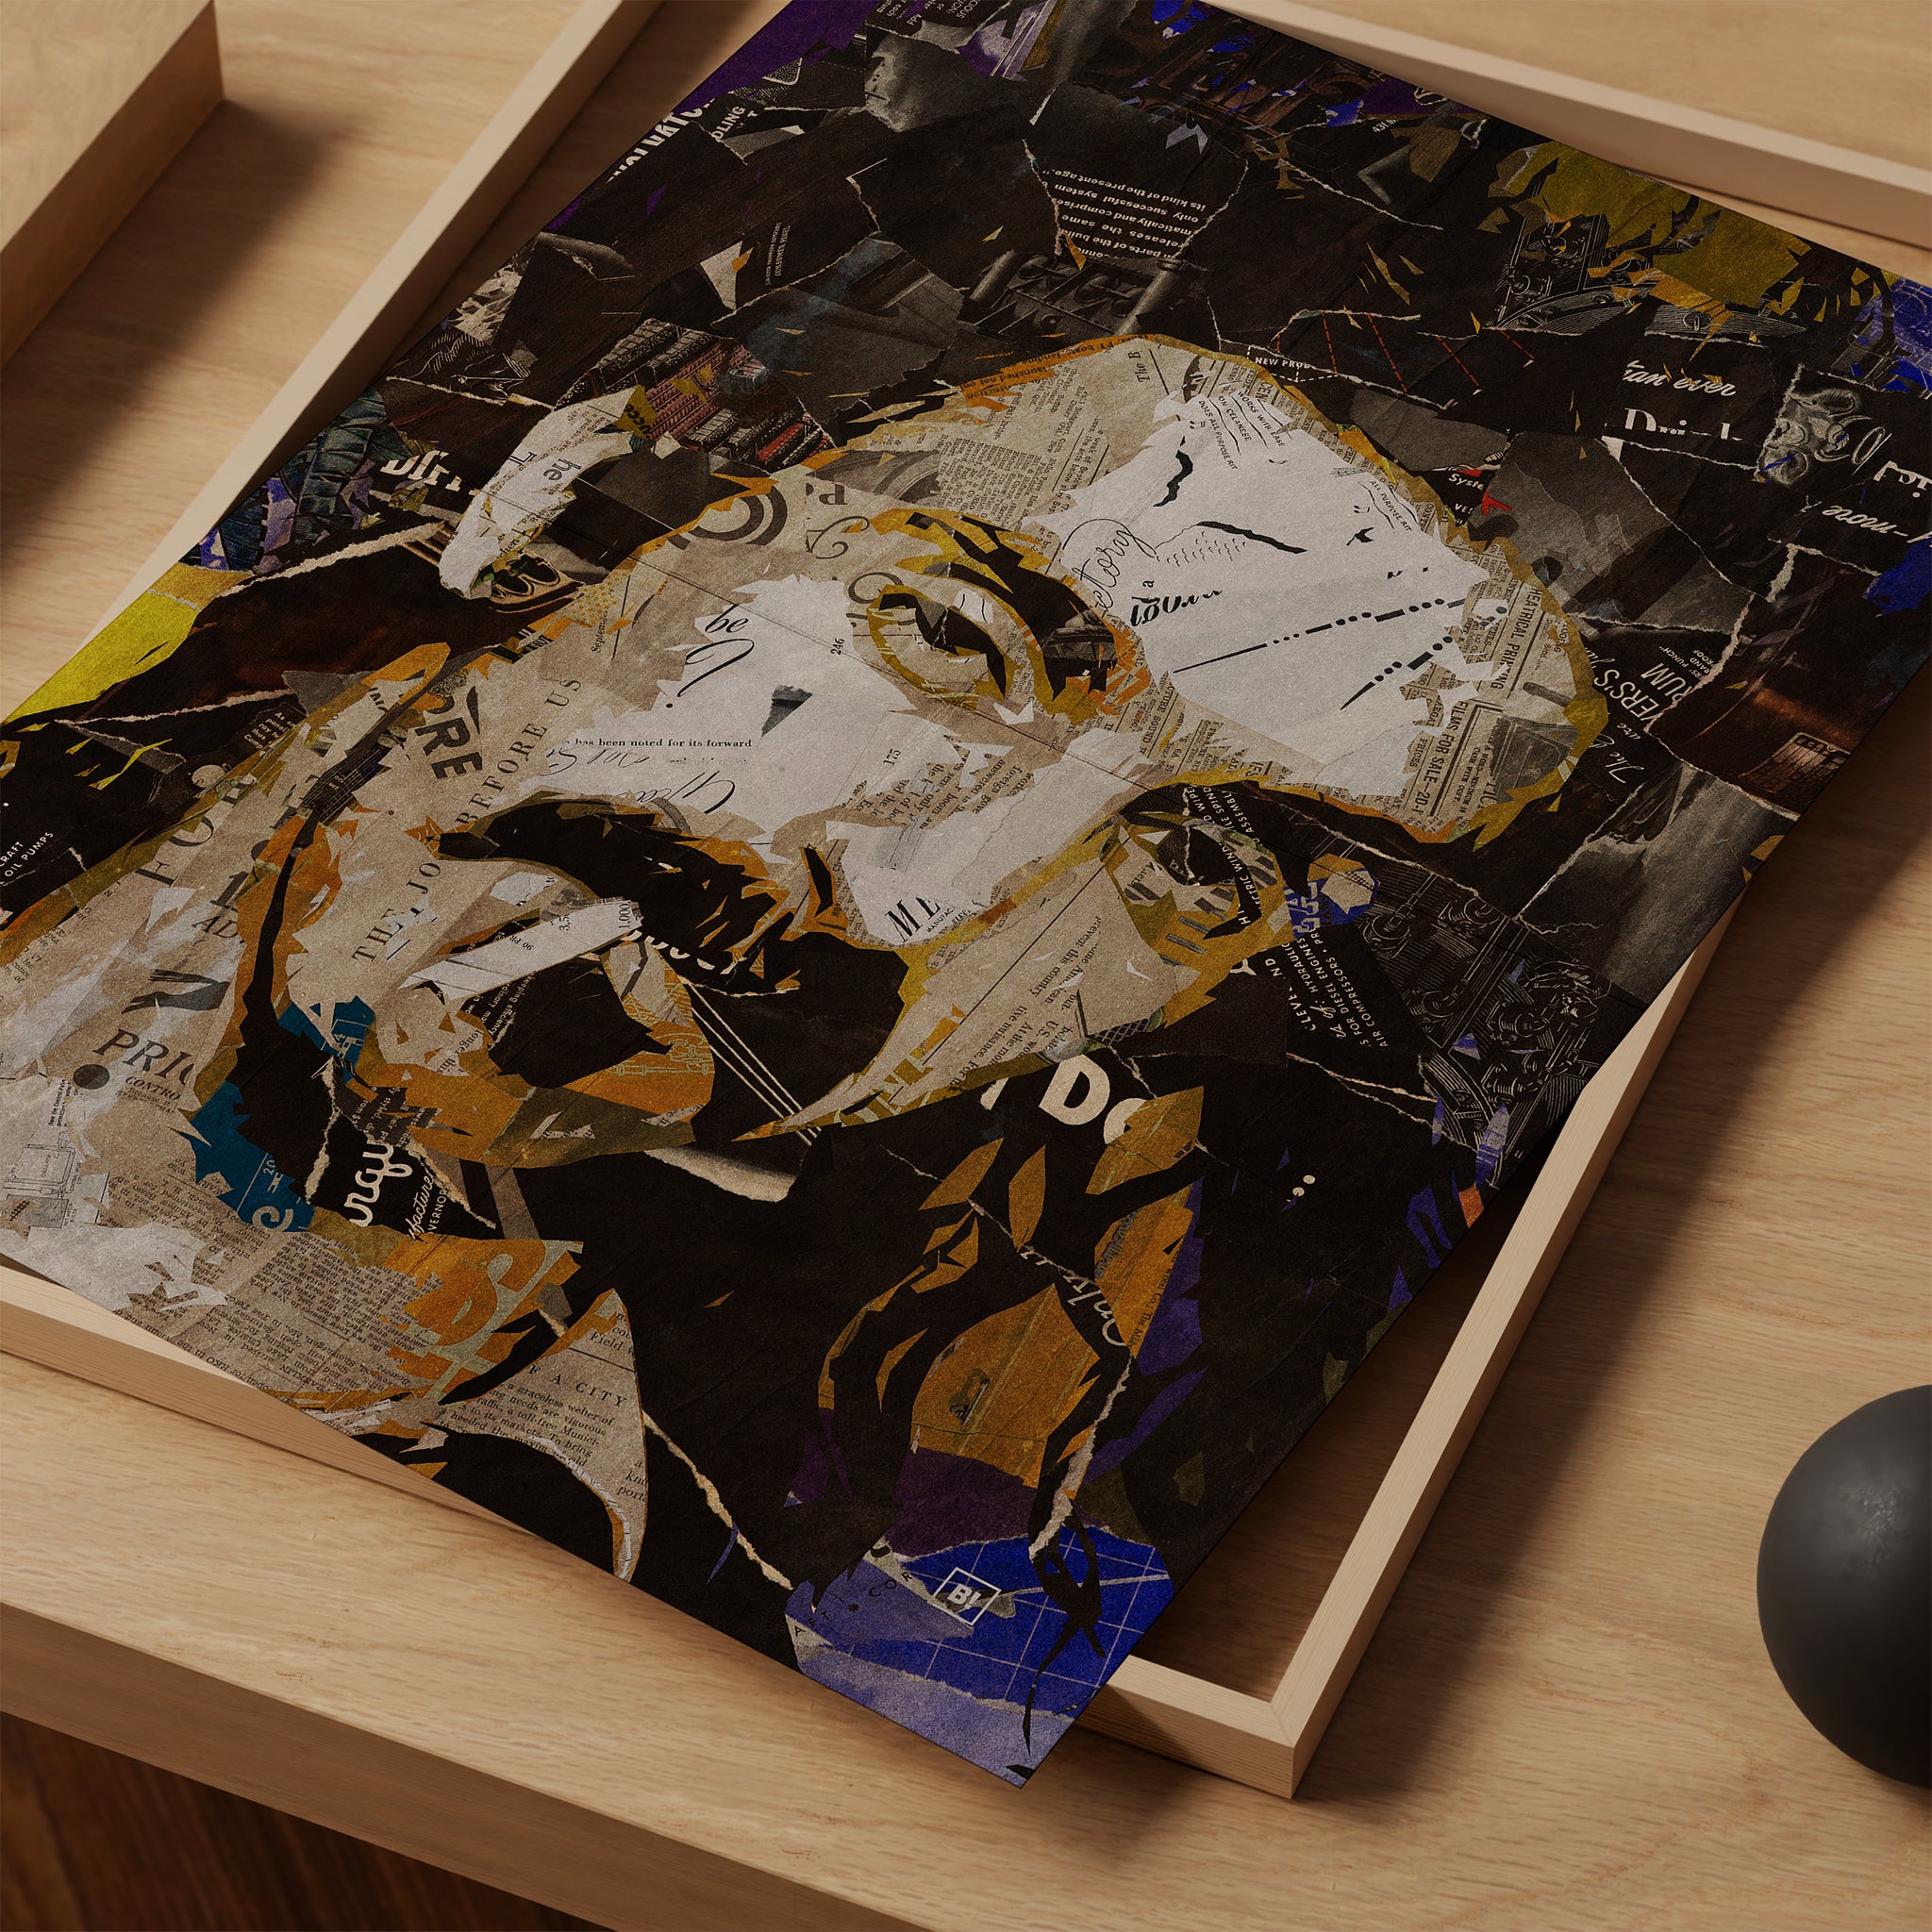 Be inspired by our iconic collage portrait art print of Frank Zappa. This artwork was printed using the giclée process on archival acid-free paper and is presented as a print close-up, capturing its timeless beauty in every detail.